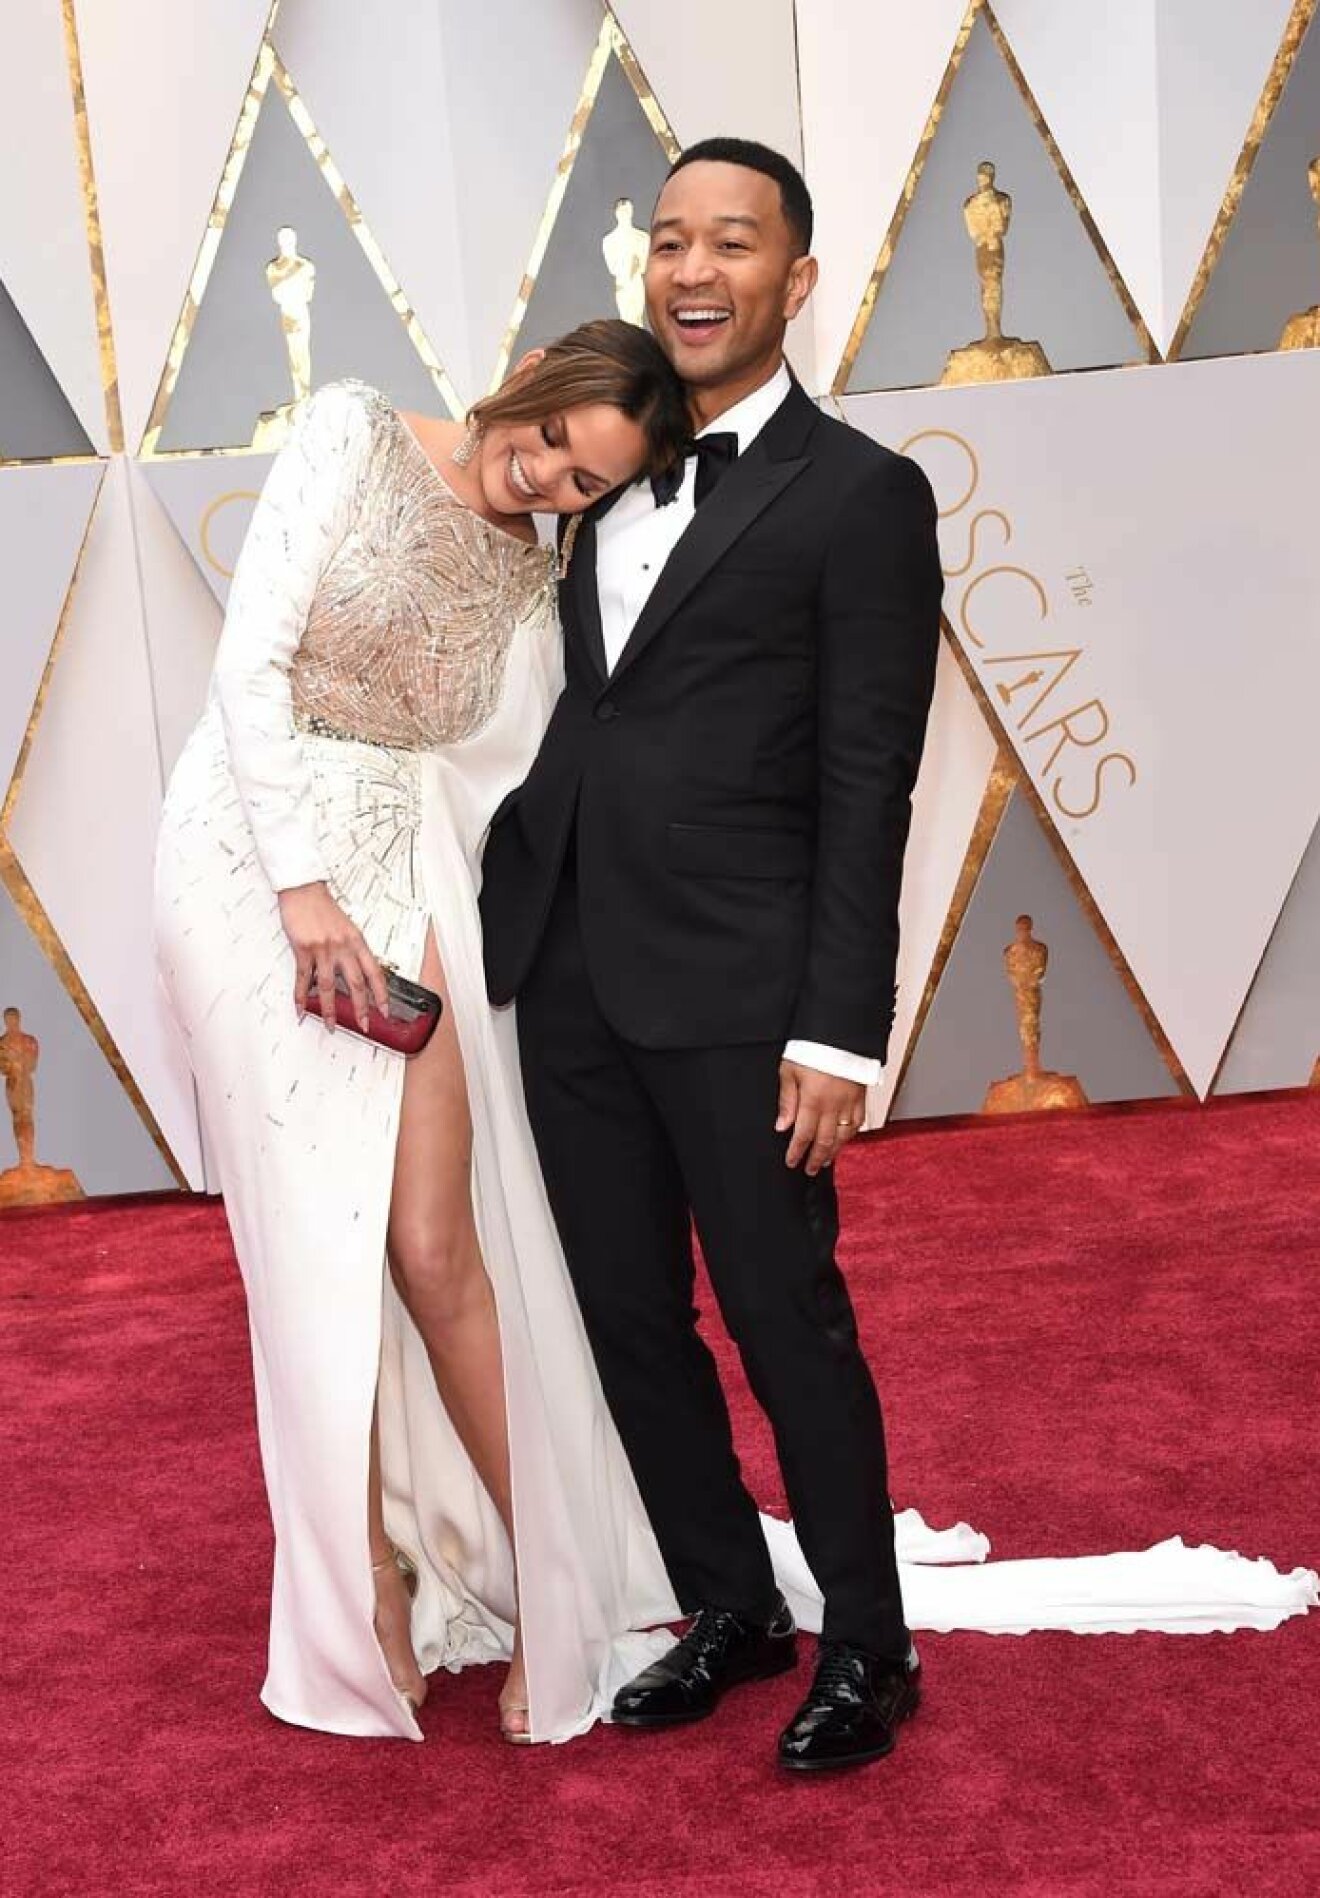 Feb 26, 2017 - Hollywood, California, U.S. - CHRISSY TEIGEN and JOHN LEGEND during red carpet arrivals for the 89th Academy Awards. (Credit Image: © Lisa O'Connor via ZUMA Wire) (c) Zumapress / IBL